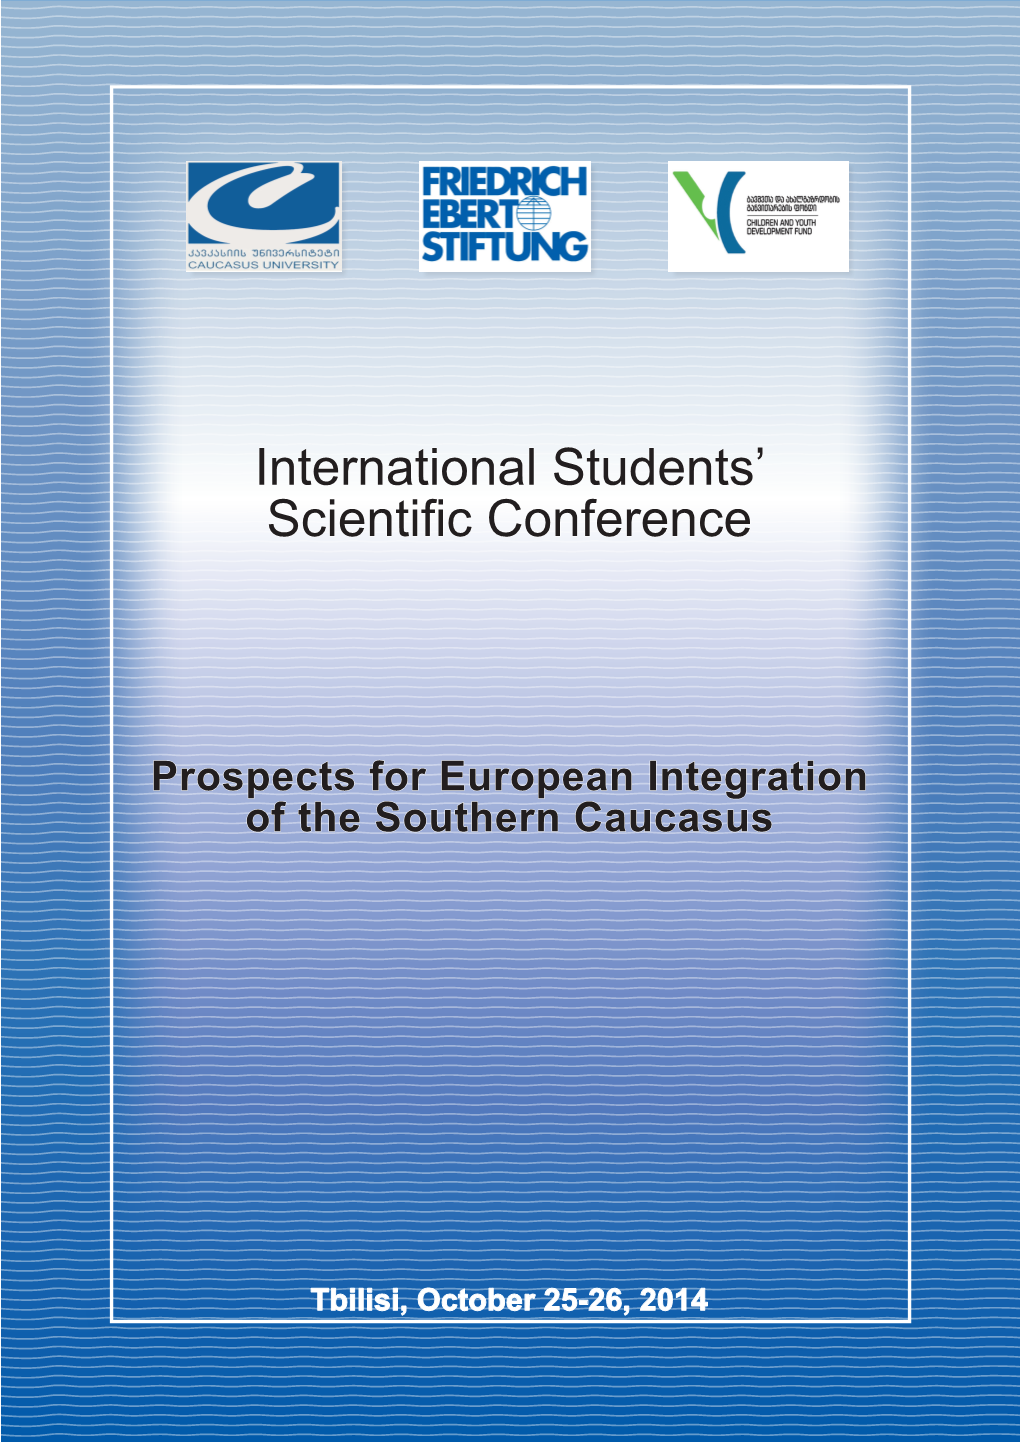 International Students' Scientific Conference